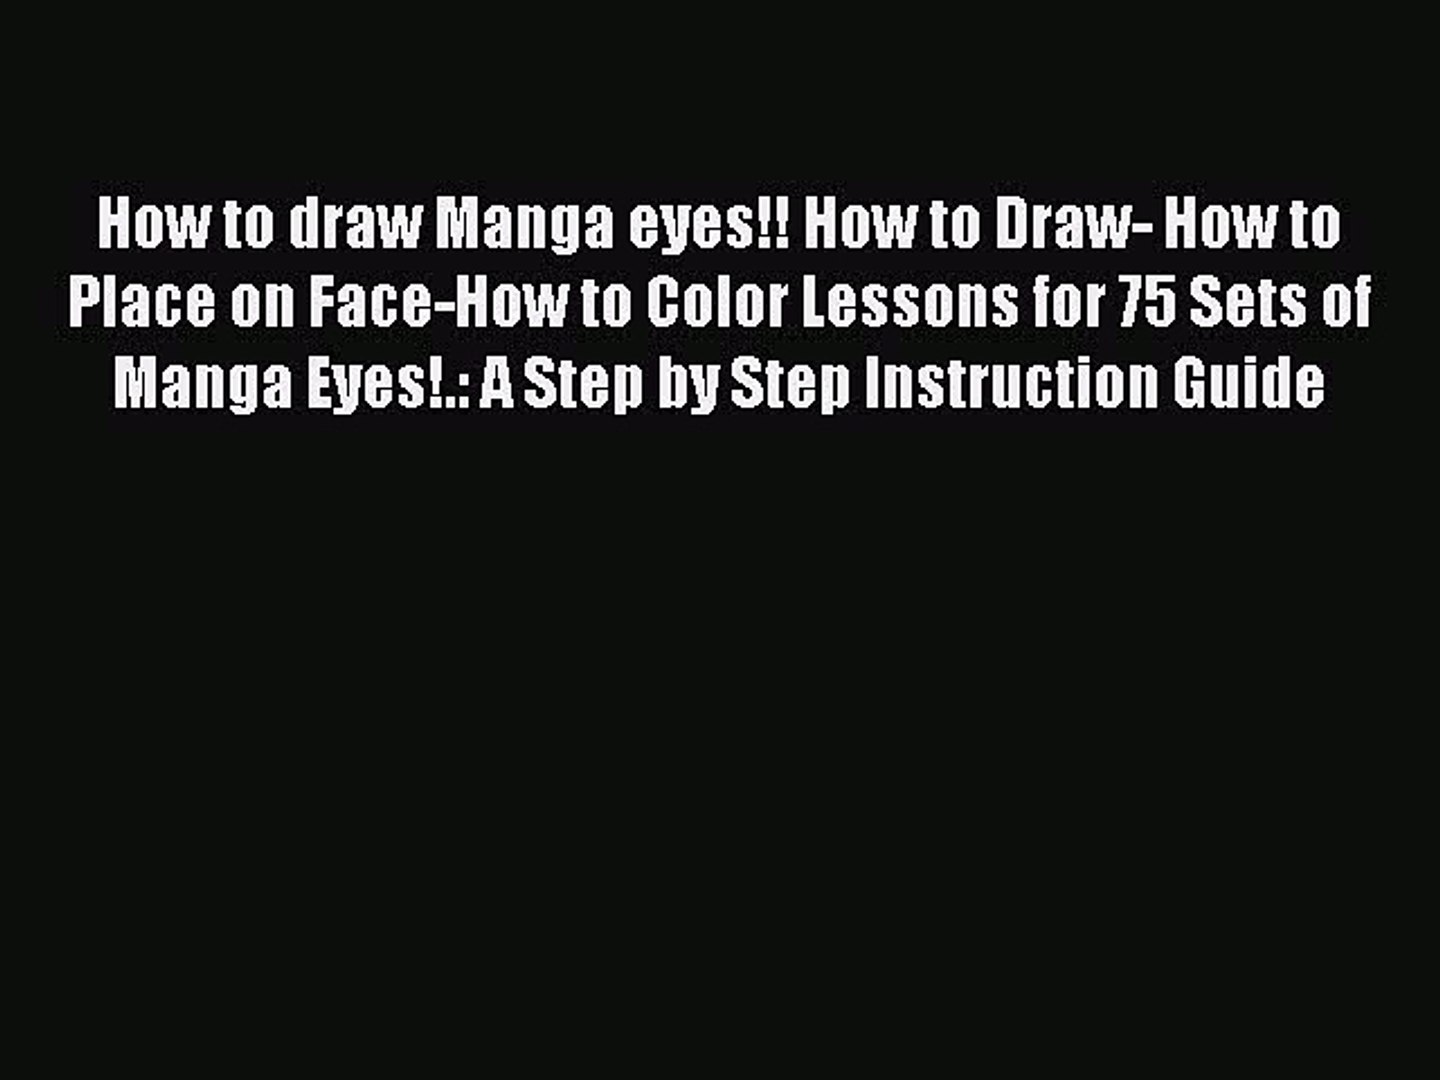 Ebook How to draw Manga eyes!! How to Draw- How to Place on Face-How to Color Lessons for 75